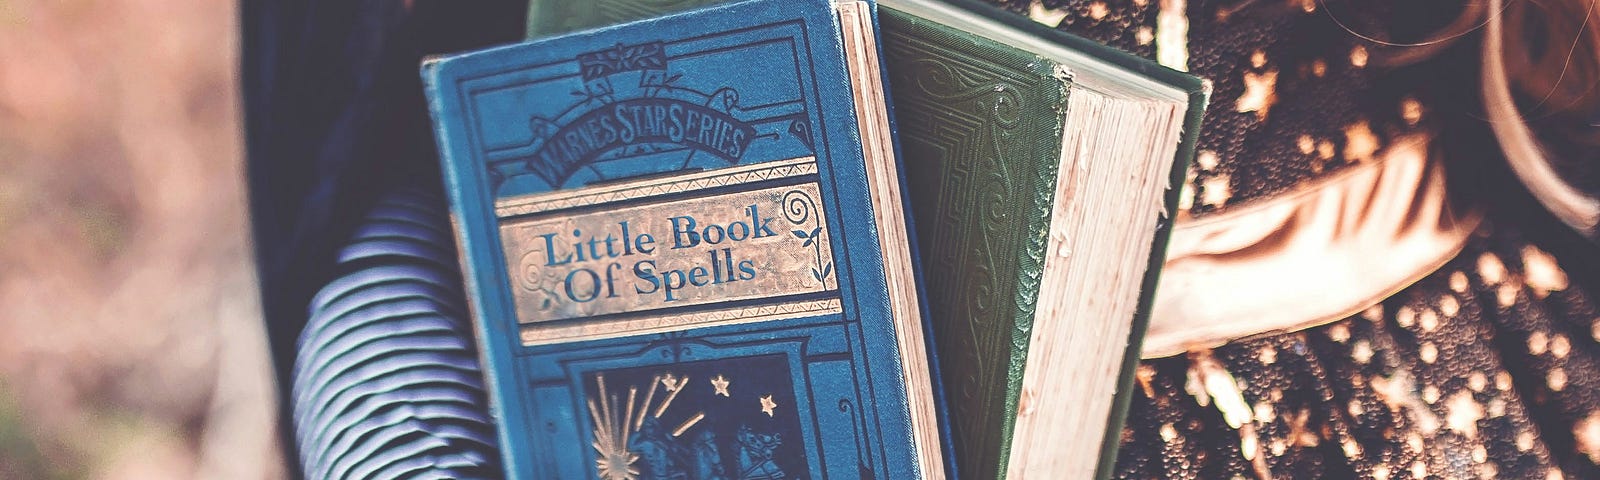 A woman holds two books, one is titled “Little Book Of Spells”